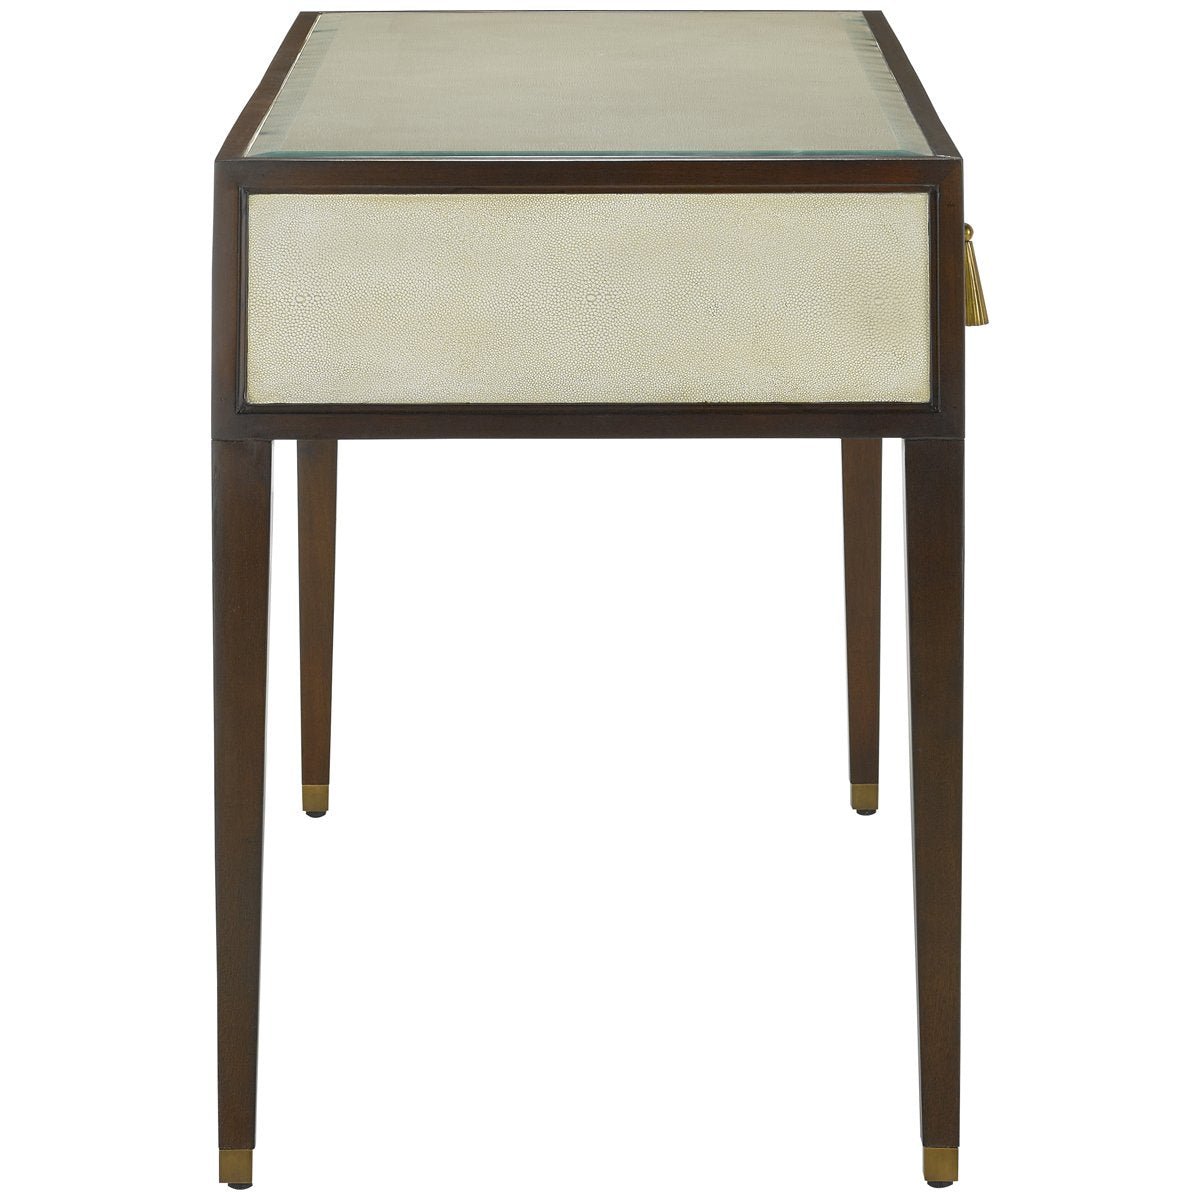 Currey and Company Evie Shagreen Desk